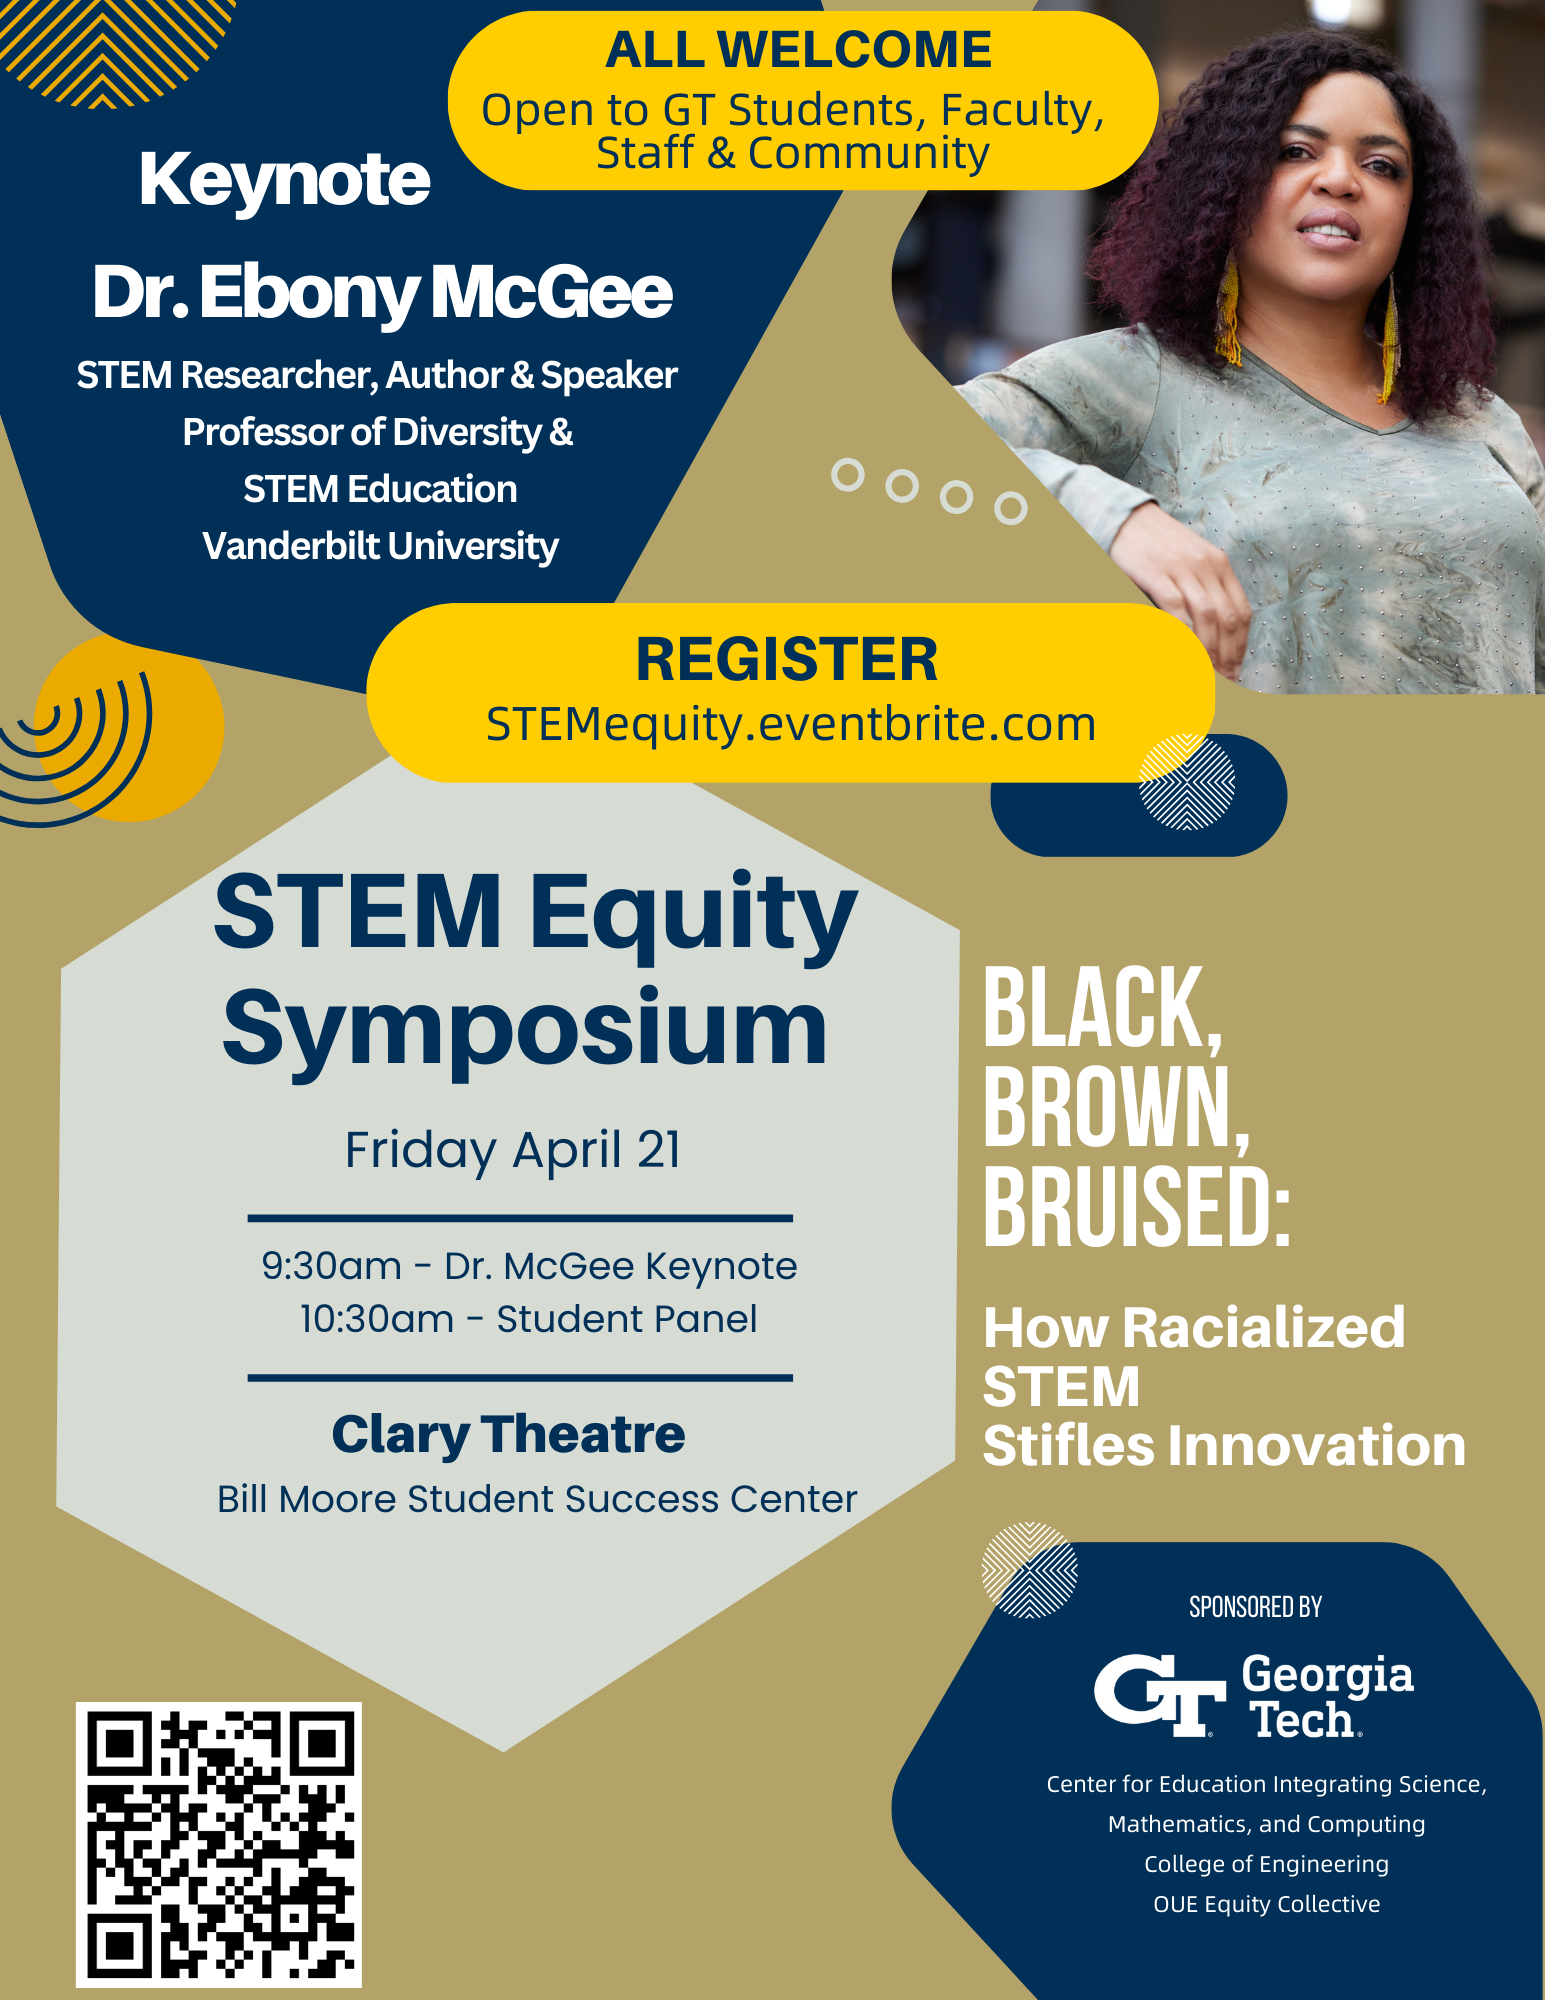 T﻿he&nbsp;STEM Equity Symposium&nbsp;is a collaboration between Georgia Tech's Center for Education Integrating Science, Mathematics, and Computing (CEISMC), the&nbsp;College of Engineering, and the&nbsp;OUE Equity Collective. Our goal is to provide programming that will foster a campus culture and climate that is welcoming for all students, faculty, and staff -- especially in STEM disciplines.
